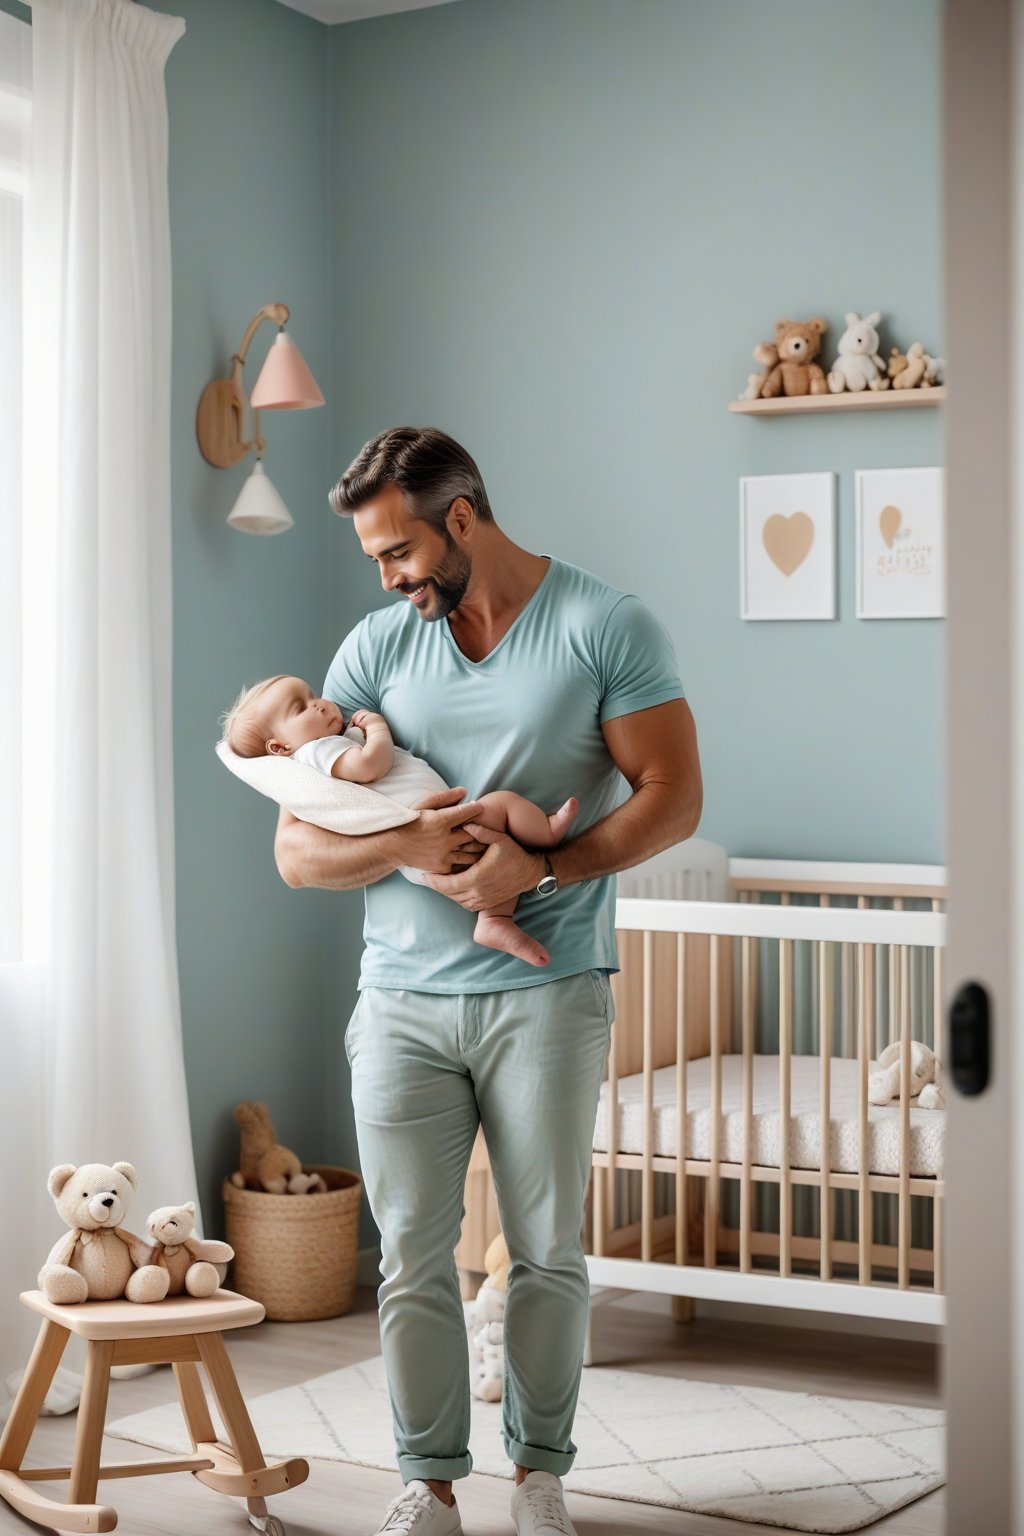 imagine the following scene In a pastel-colored baby room with a crib, mobiles and toys is a handsome mature man with a baby in his arms. The man is Greek, 40yo, handsome, masculine, strong. The baby is blonde. The baby sleeps in the man's arms. The image is tender, it represents the love of a father for his son.